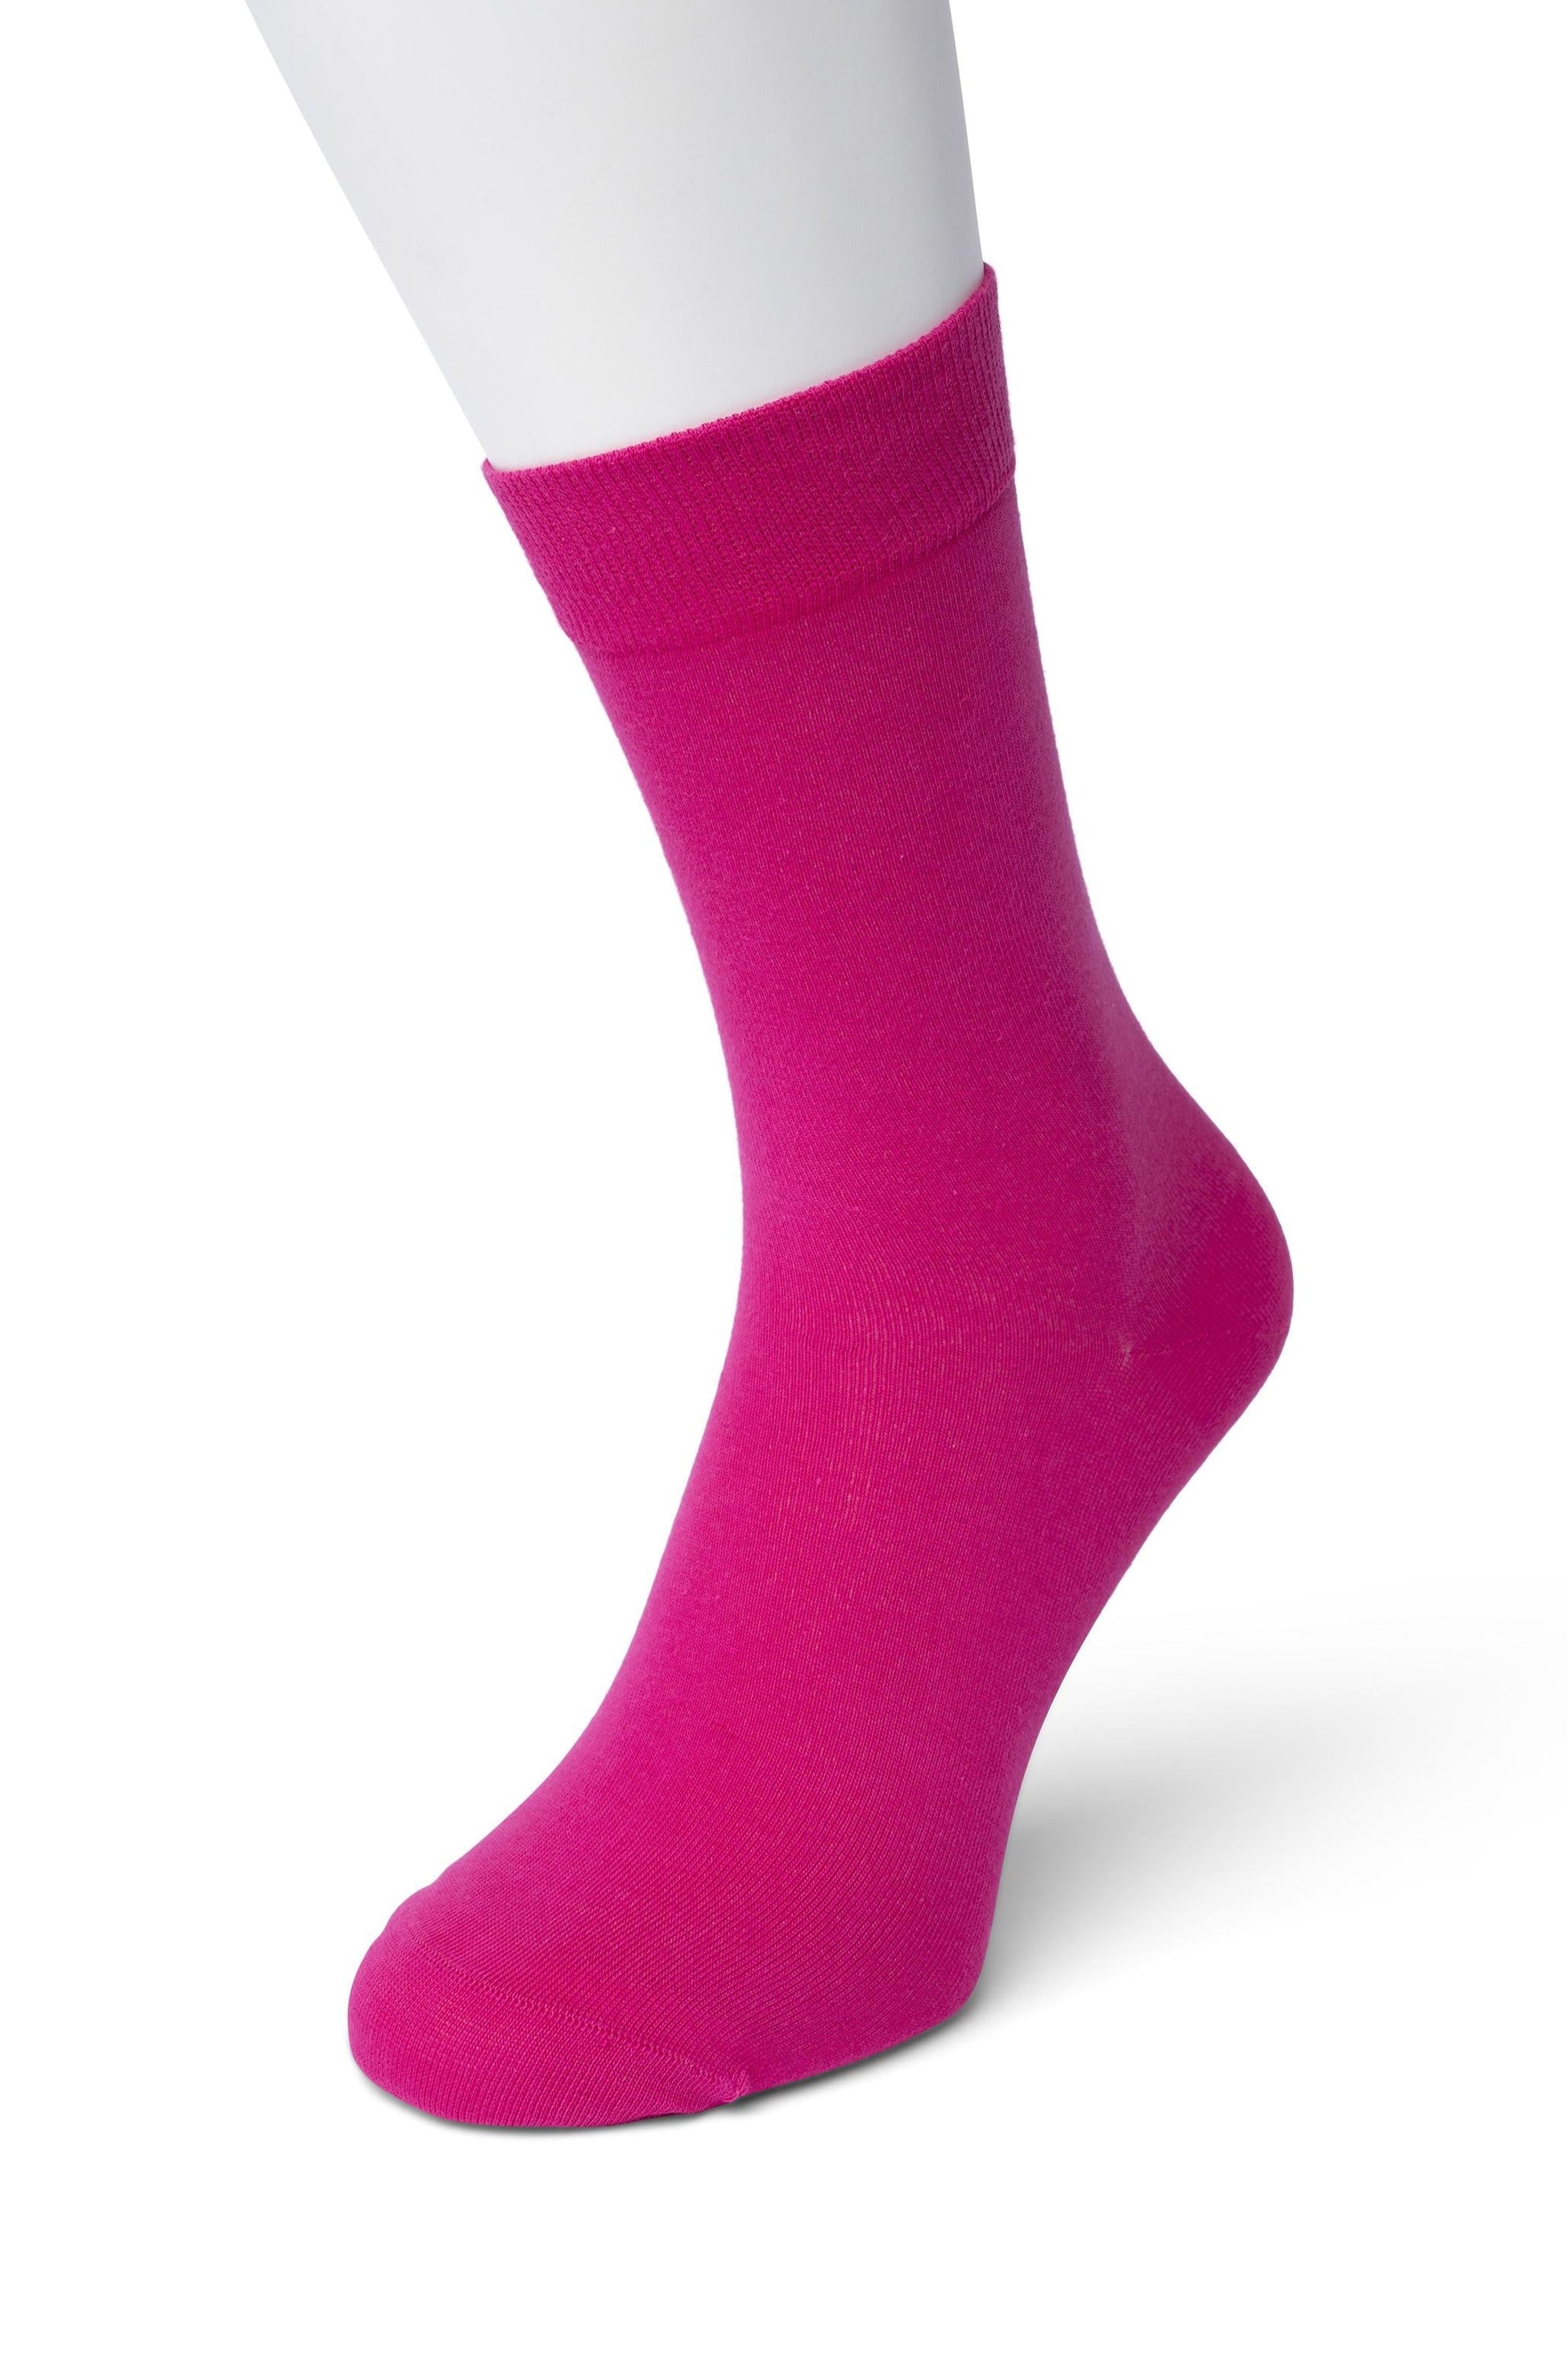 Bonnie Doon 83422 / BD632401 Cotton Sock -  Bright fuchsia pink socks available in men and women sizes